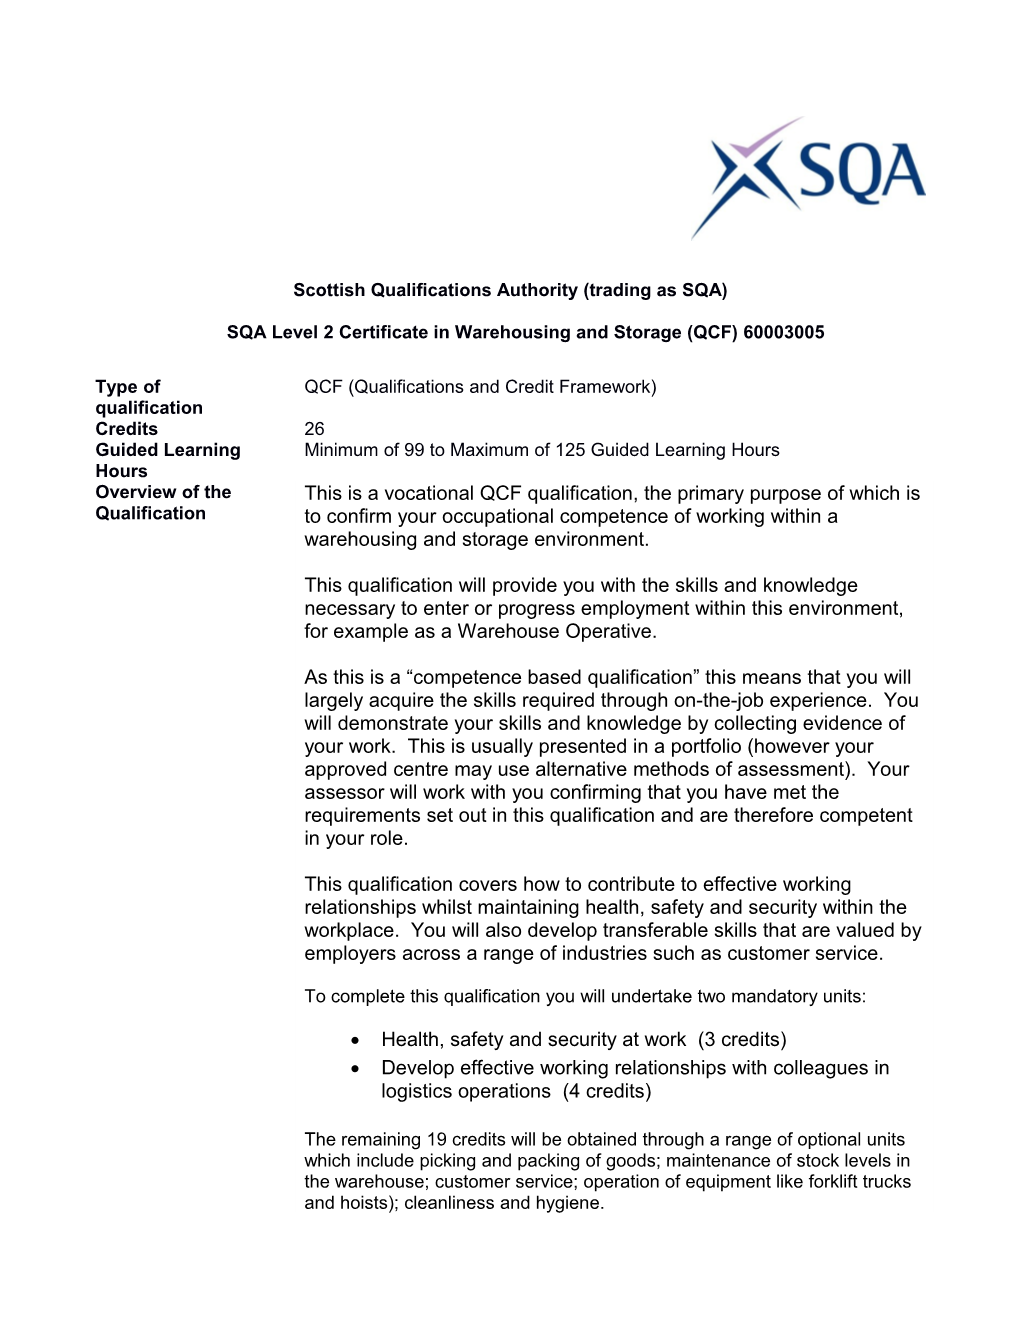 Scottish Qualifications Authority (Trading As SQA)